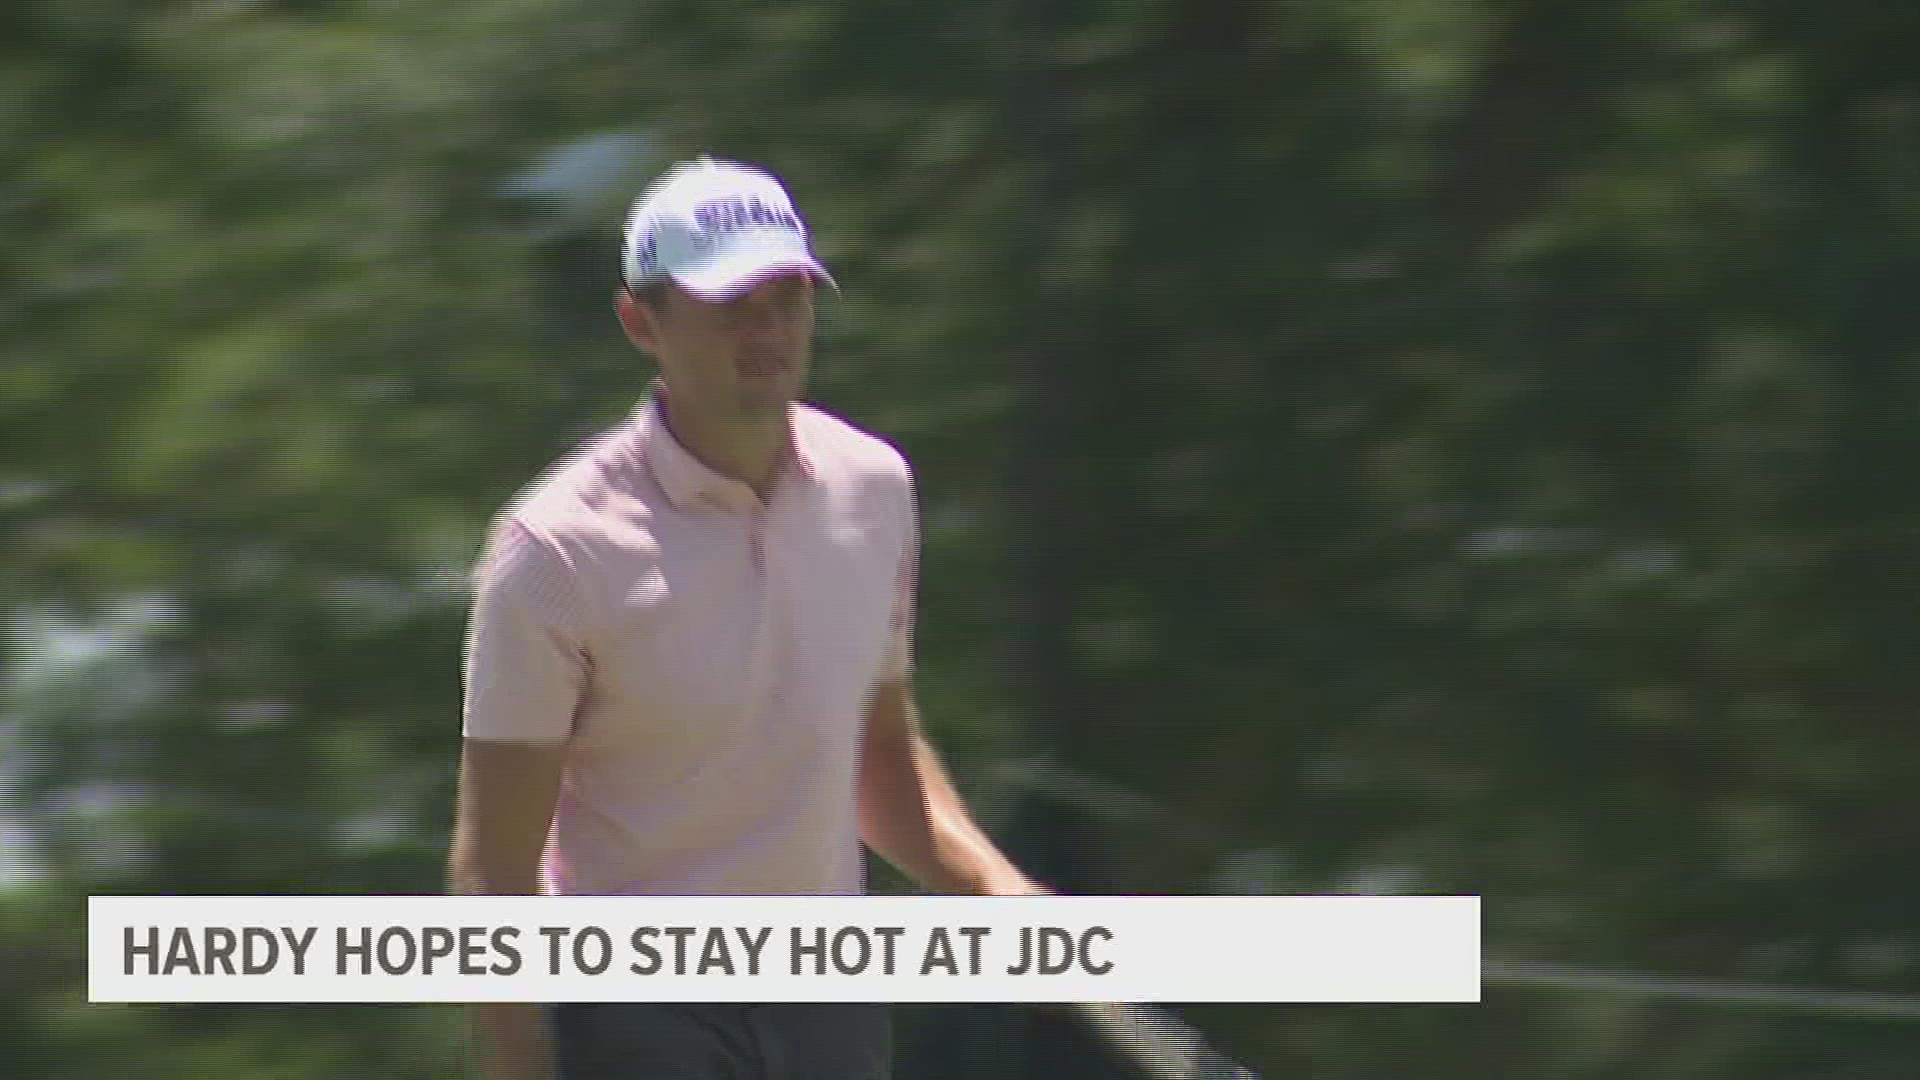 The Sperry, Iowa native earned his spot in the JDC after several years of enjoying the tournament as a spectator.